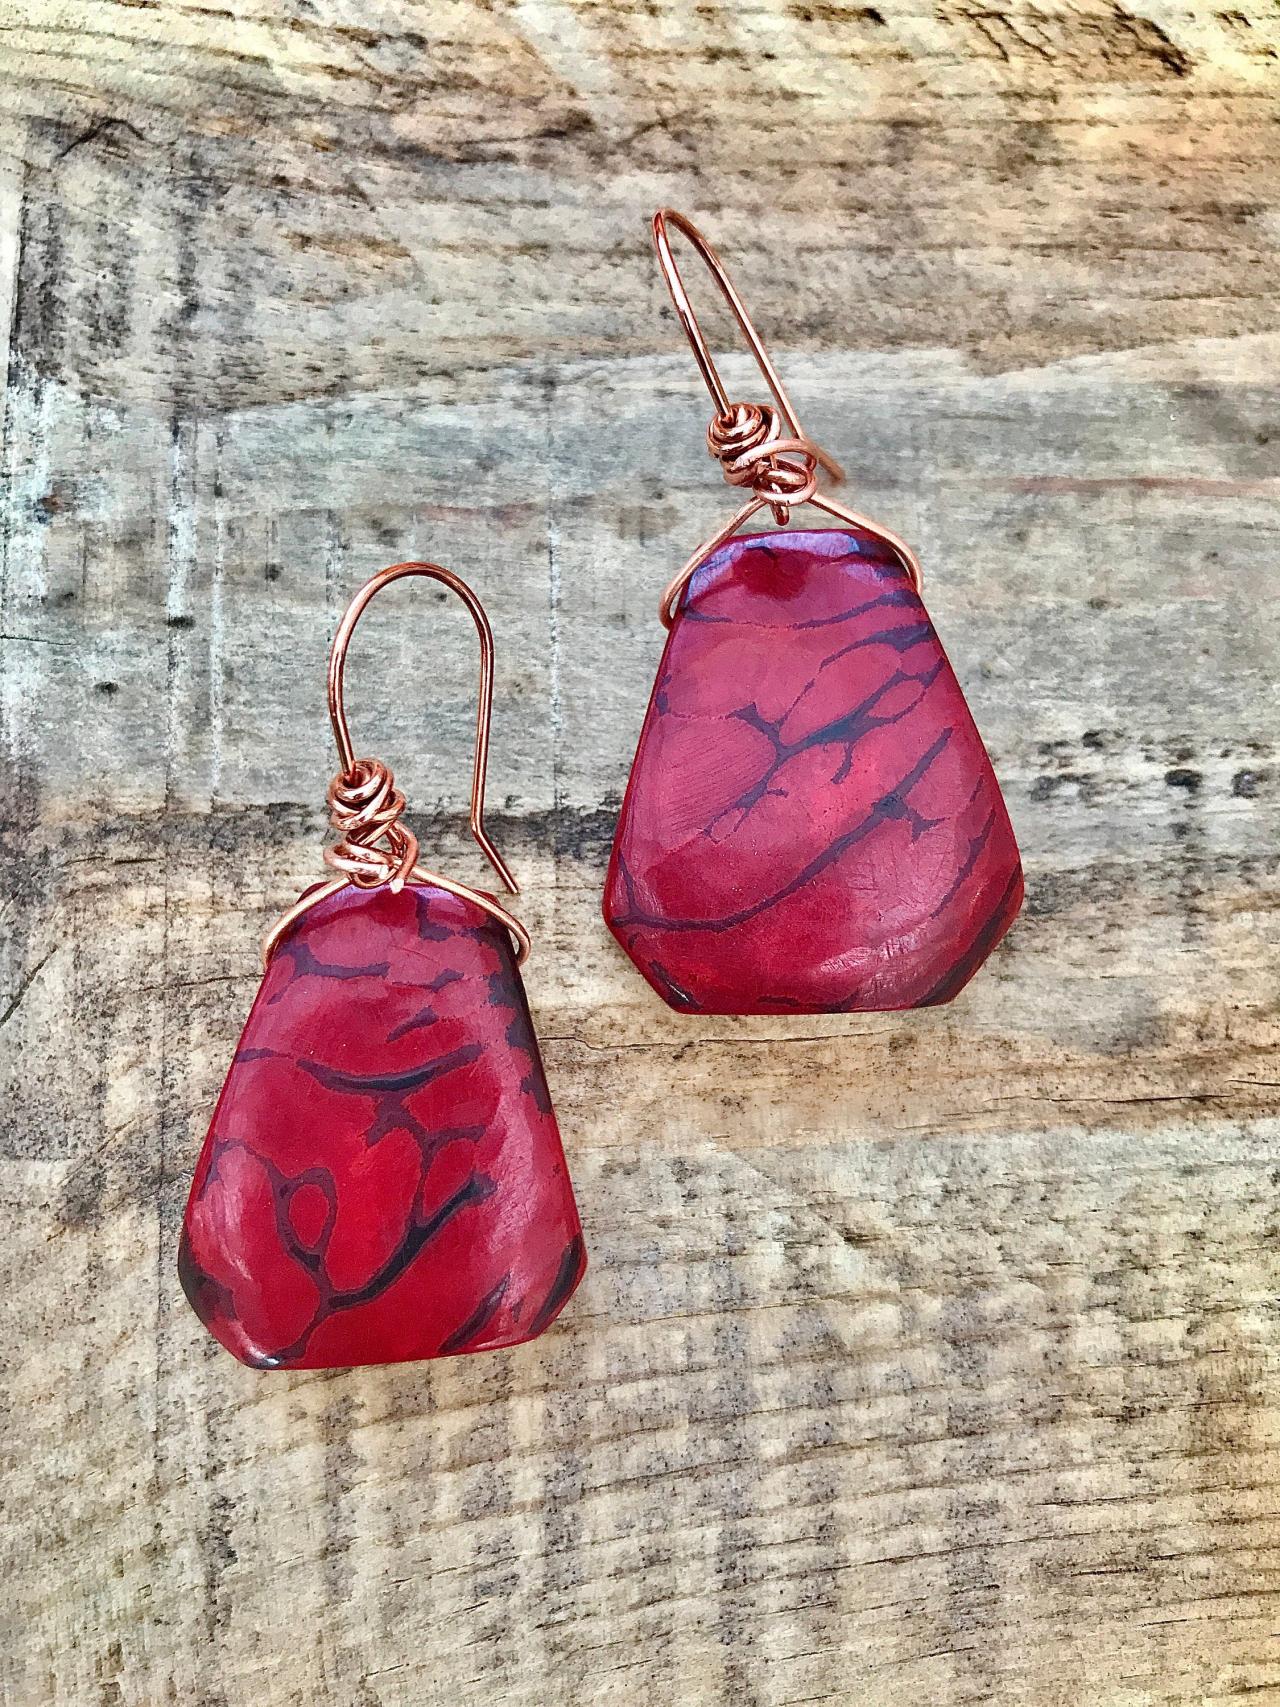 Wine Red Tagua Nut (vegetable Ivory) Dangle Earrings With Copper Ear Wires.